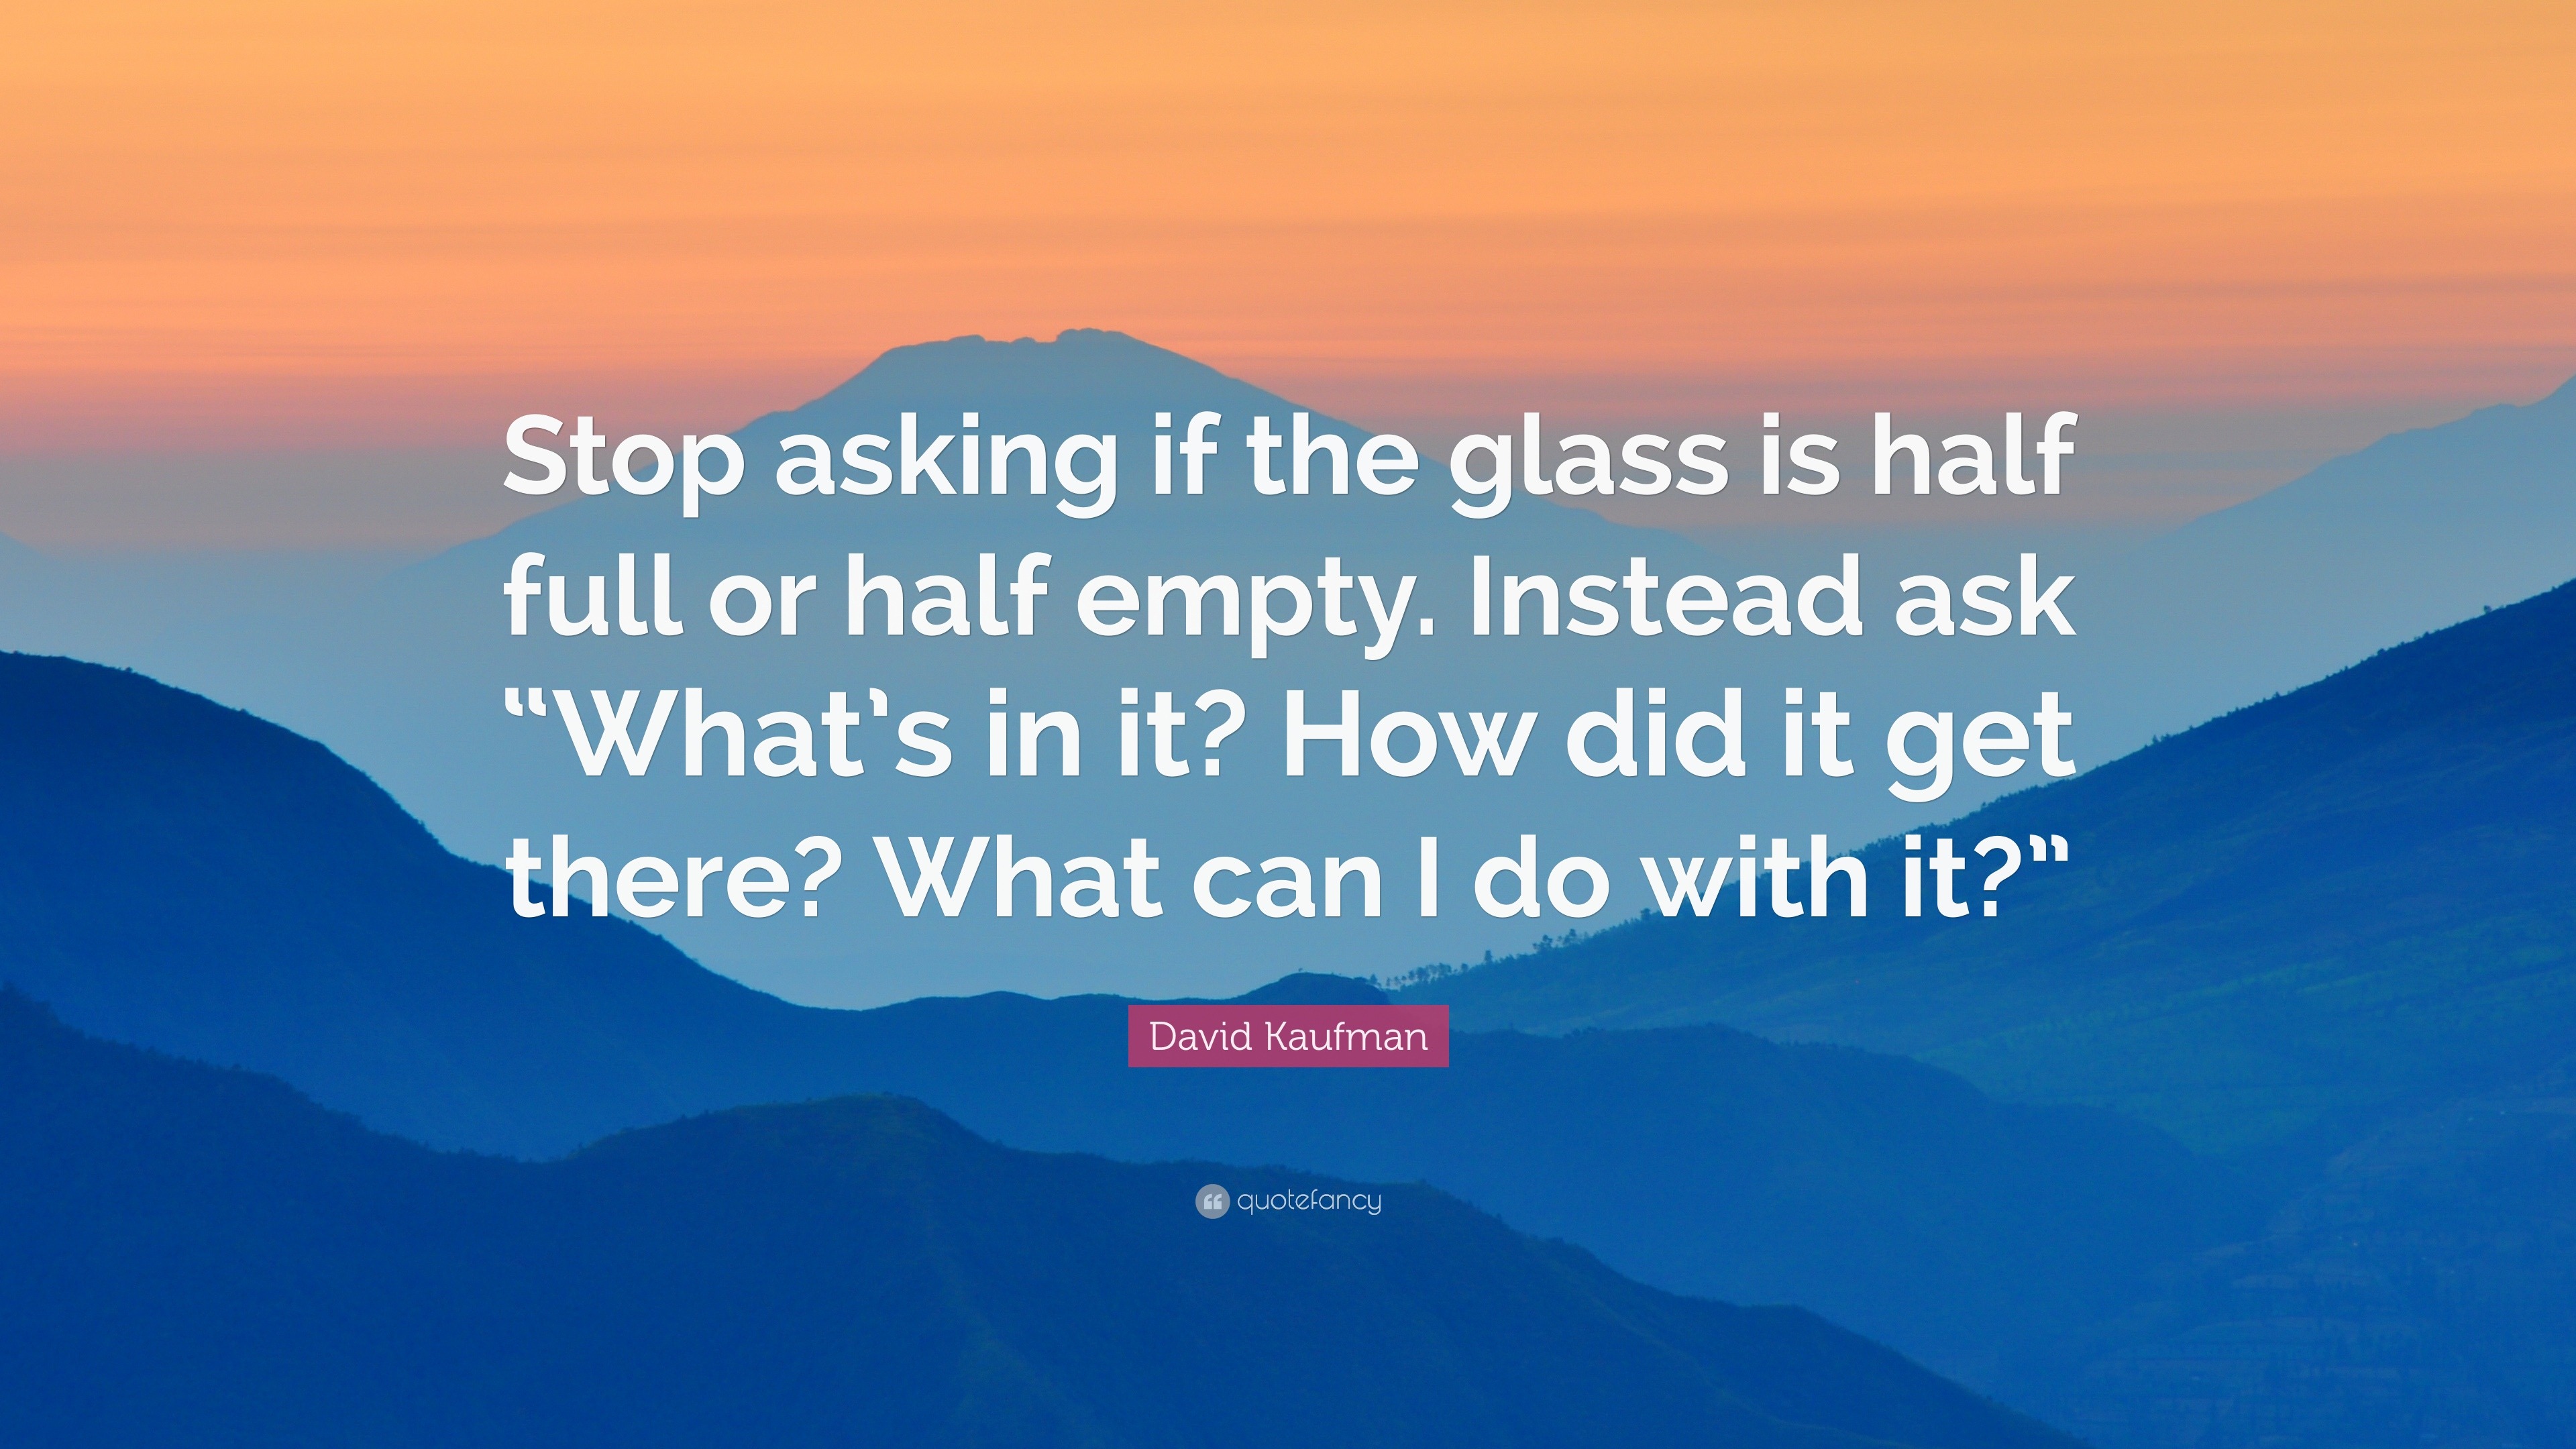 David Kaufman Quote “stop Asking If The Glass Is Half Full Or Half Empty Instead Ask “whats